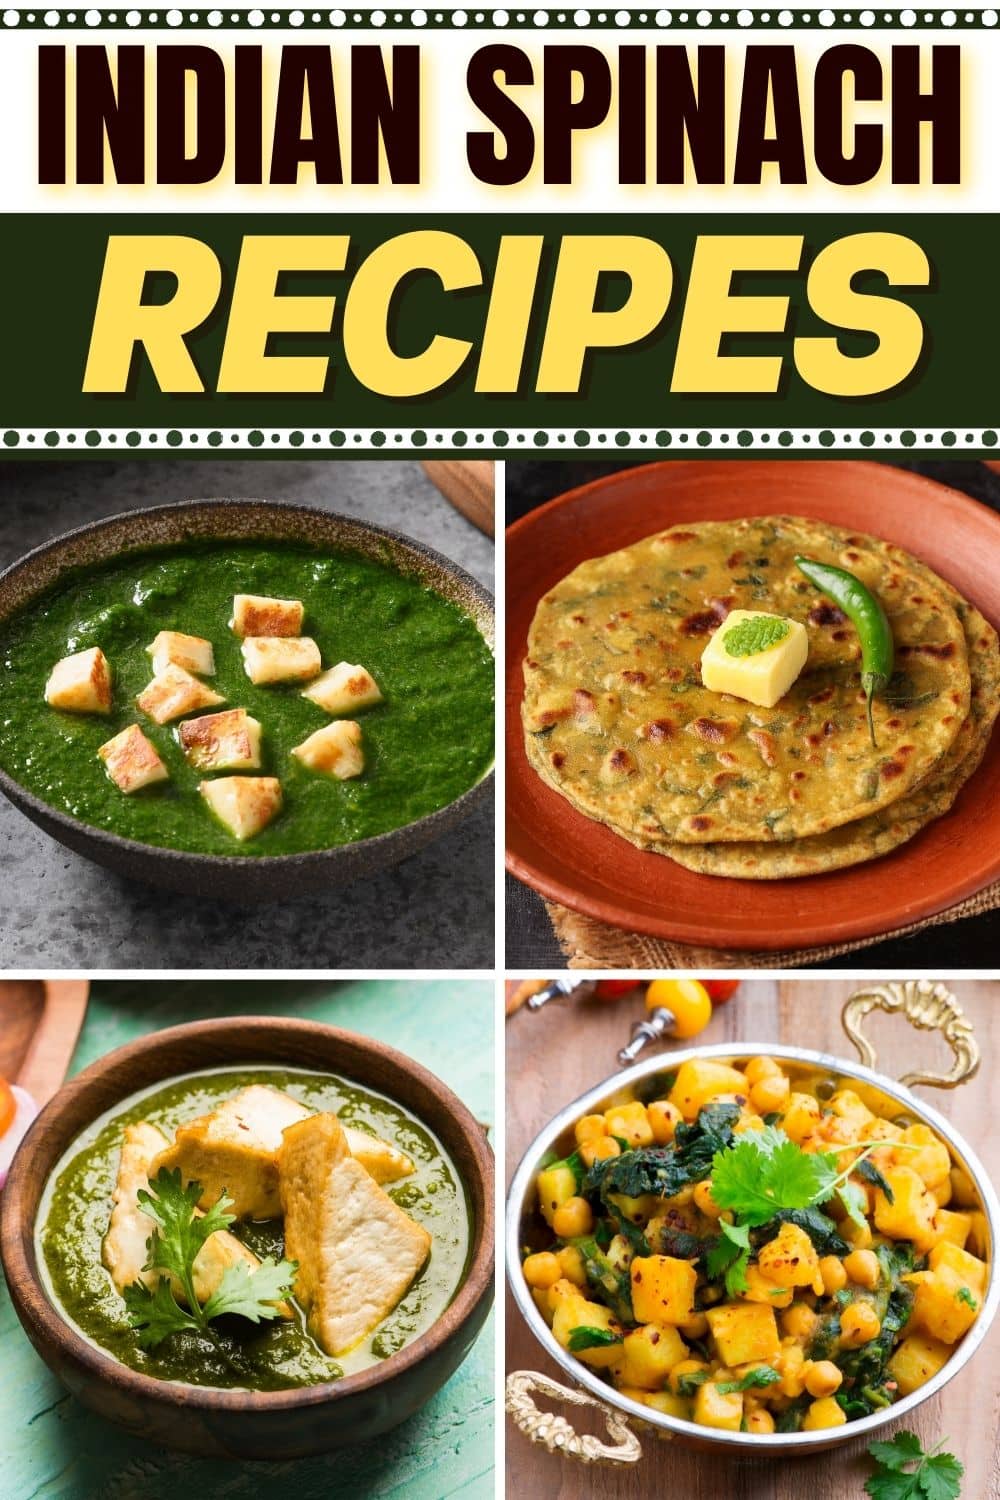 20 Authentic Indian Spinach Recipes (+ Easy Palak Dishes) - Insanely Good